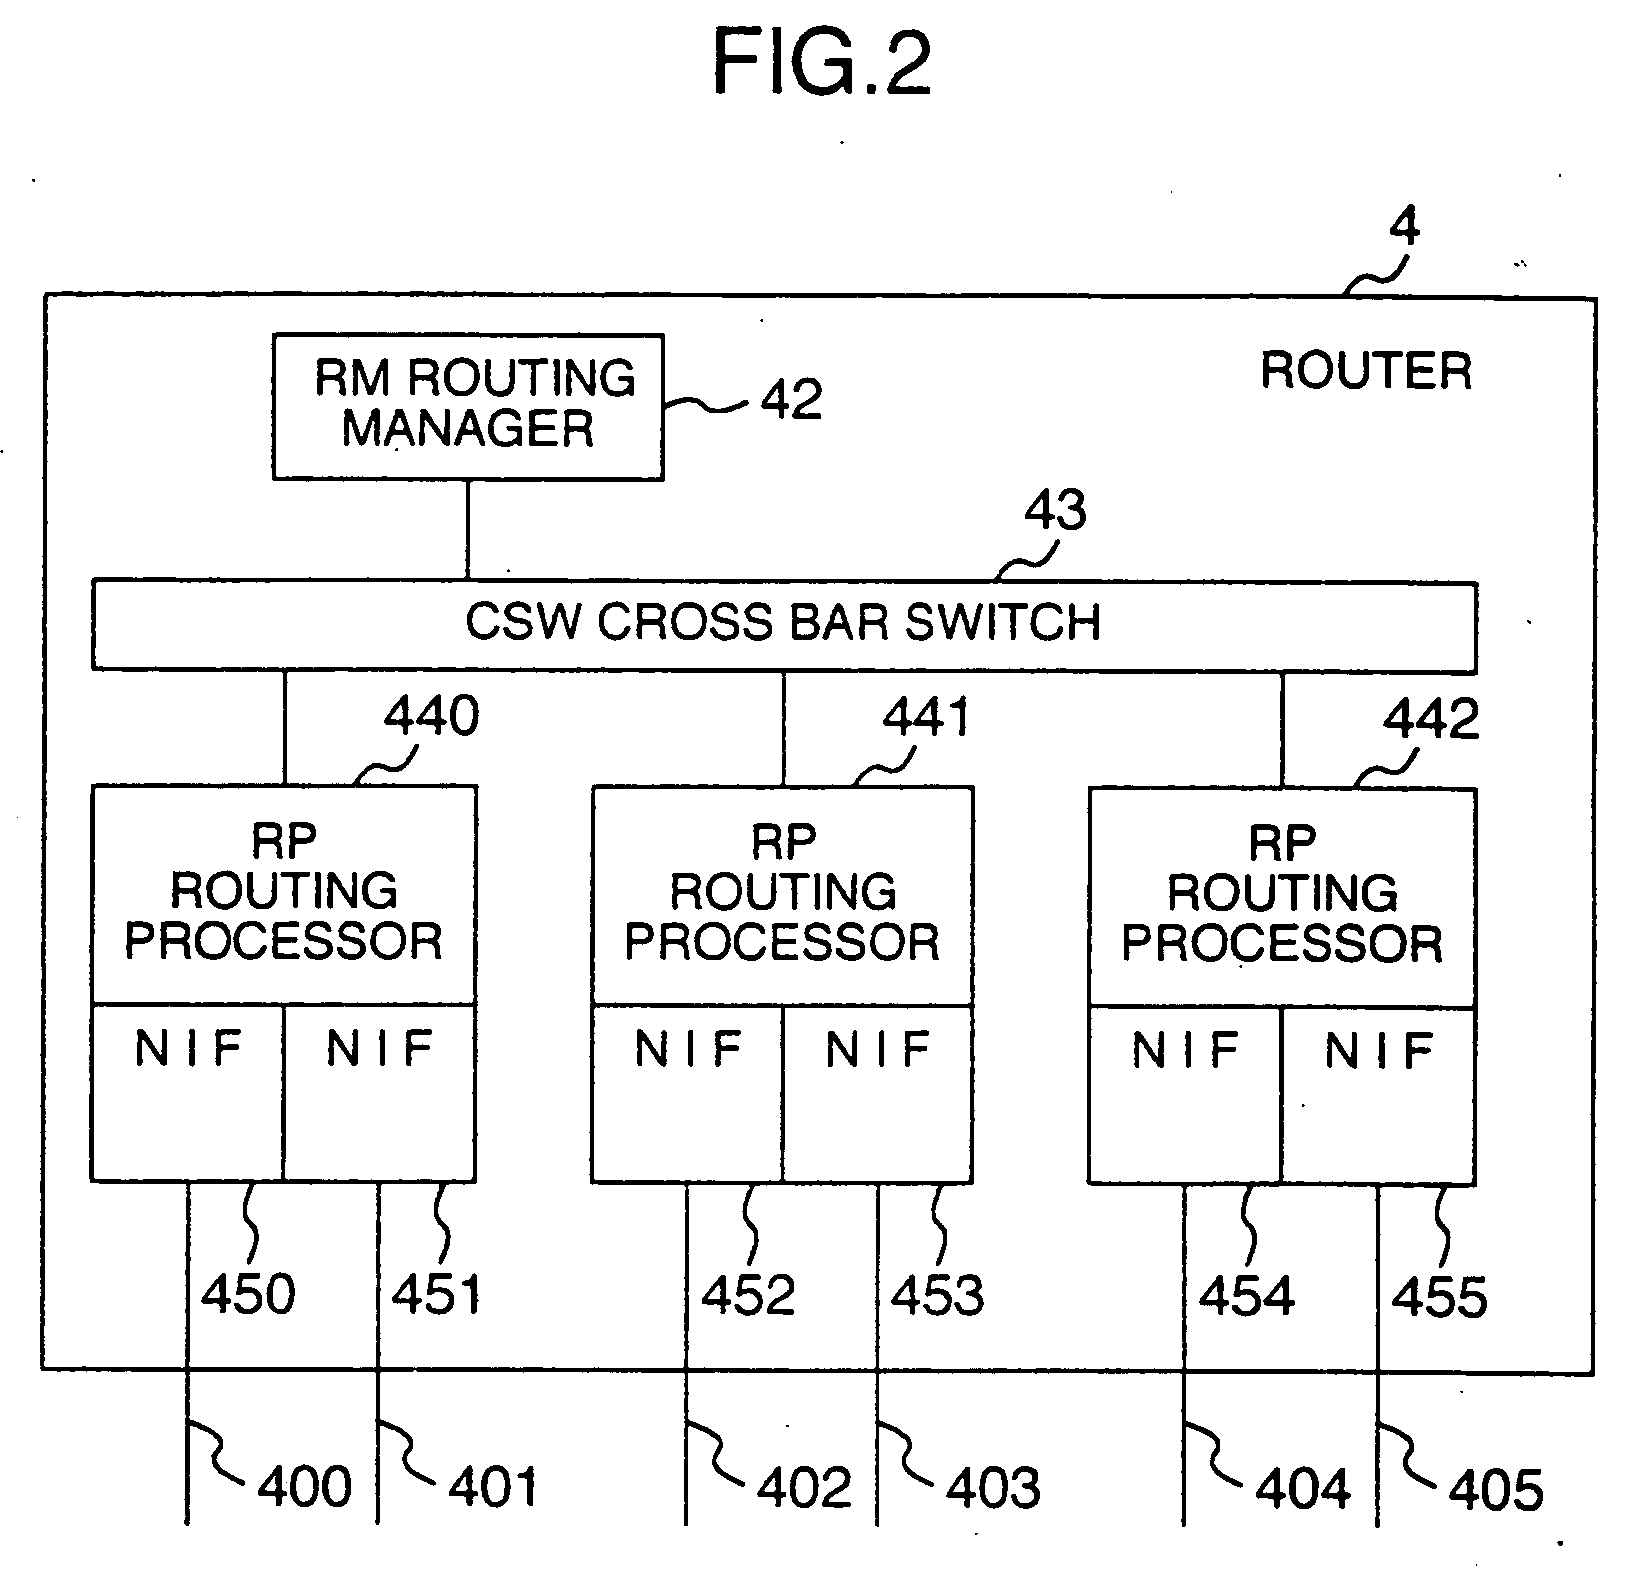 Network routing apparatus